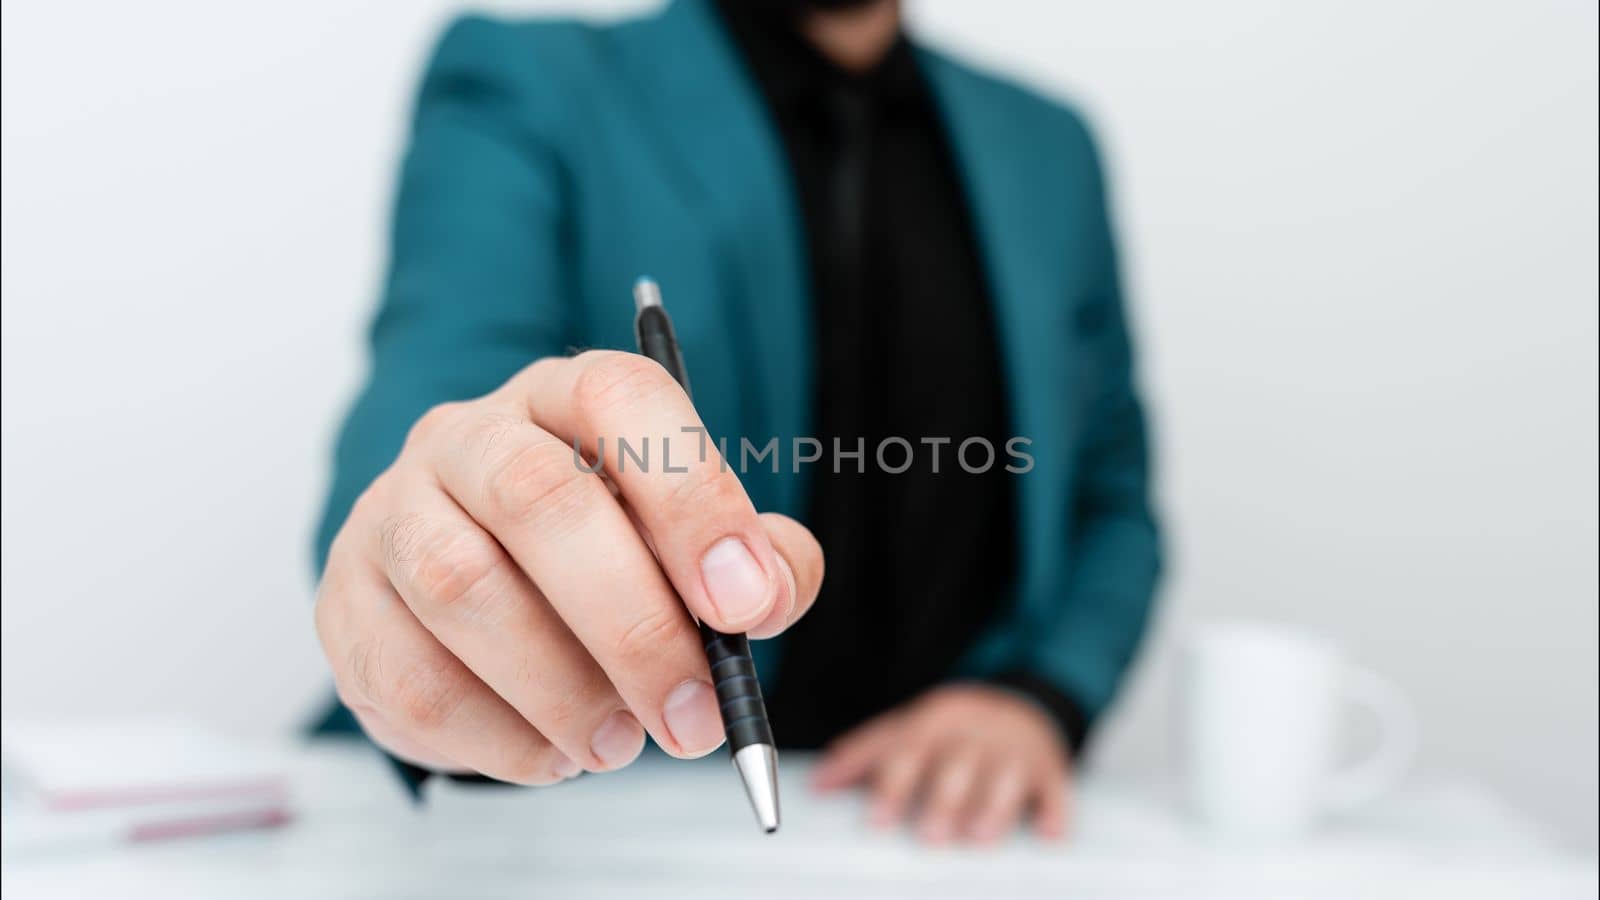 Male model in Blue suit sitting at white table And Pointing With Pen On Important Message. Gentleman Showing Critical Announcement. Coffee cup on deck. by nialowwa